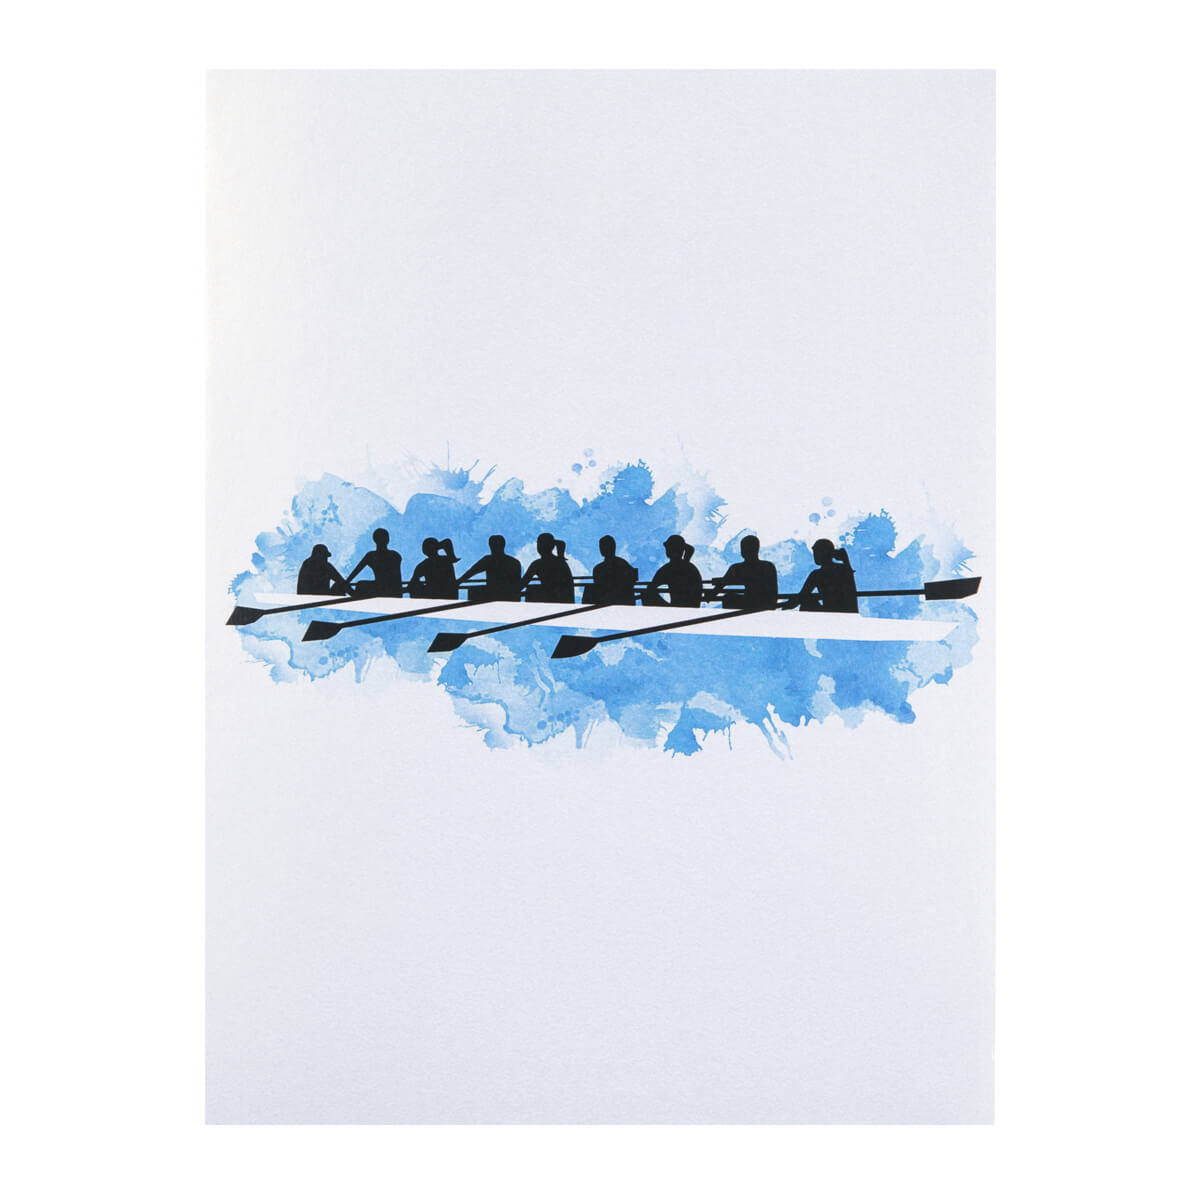 Rowing Pop Up Card - 8 Rowers Men and Women - Close Up Image